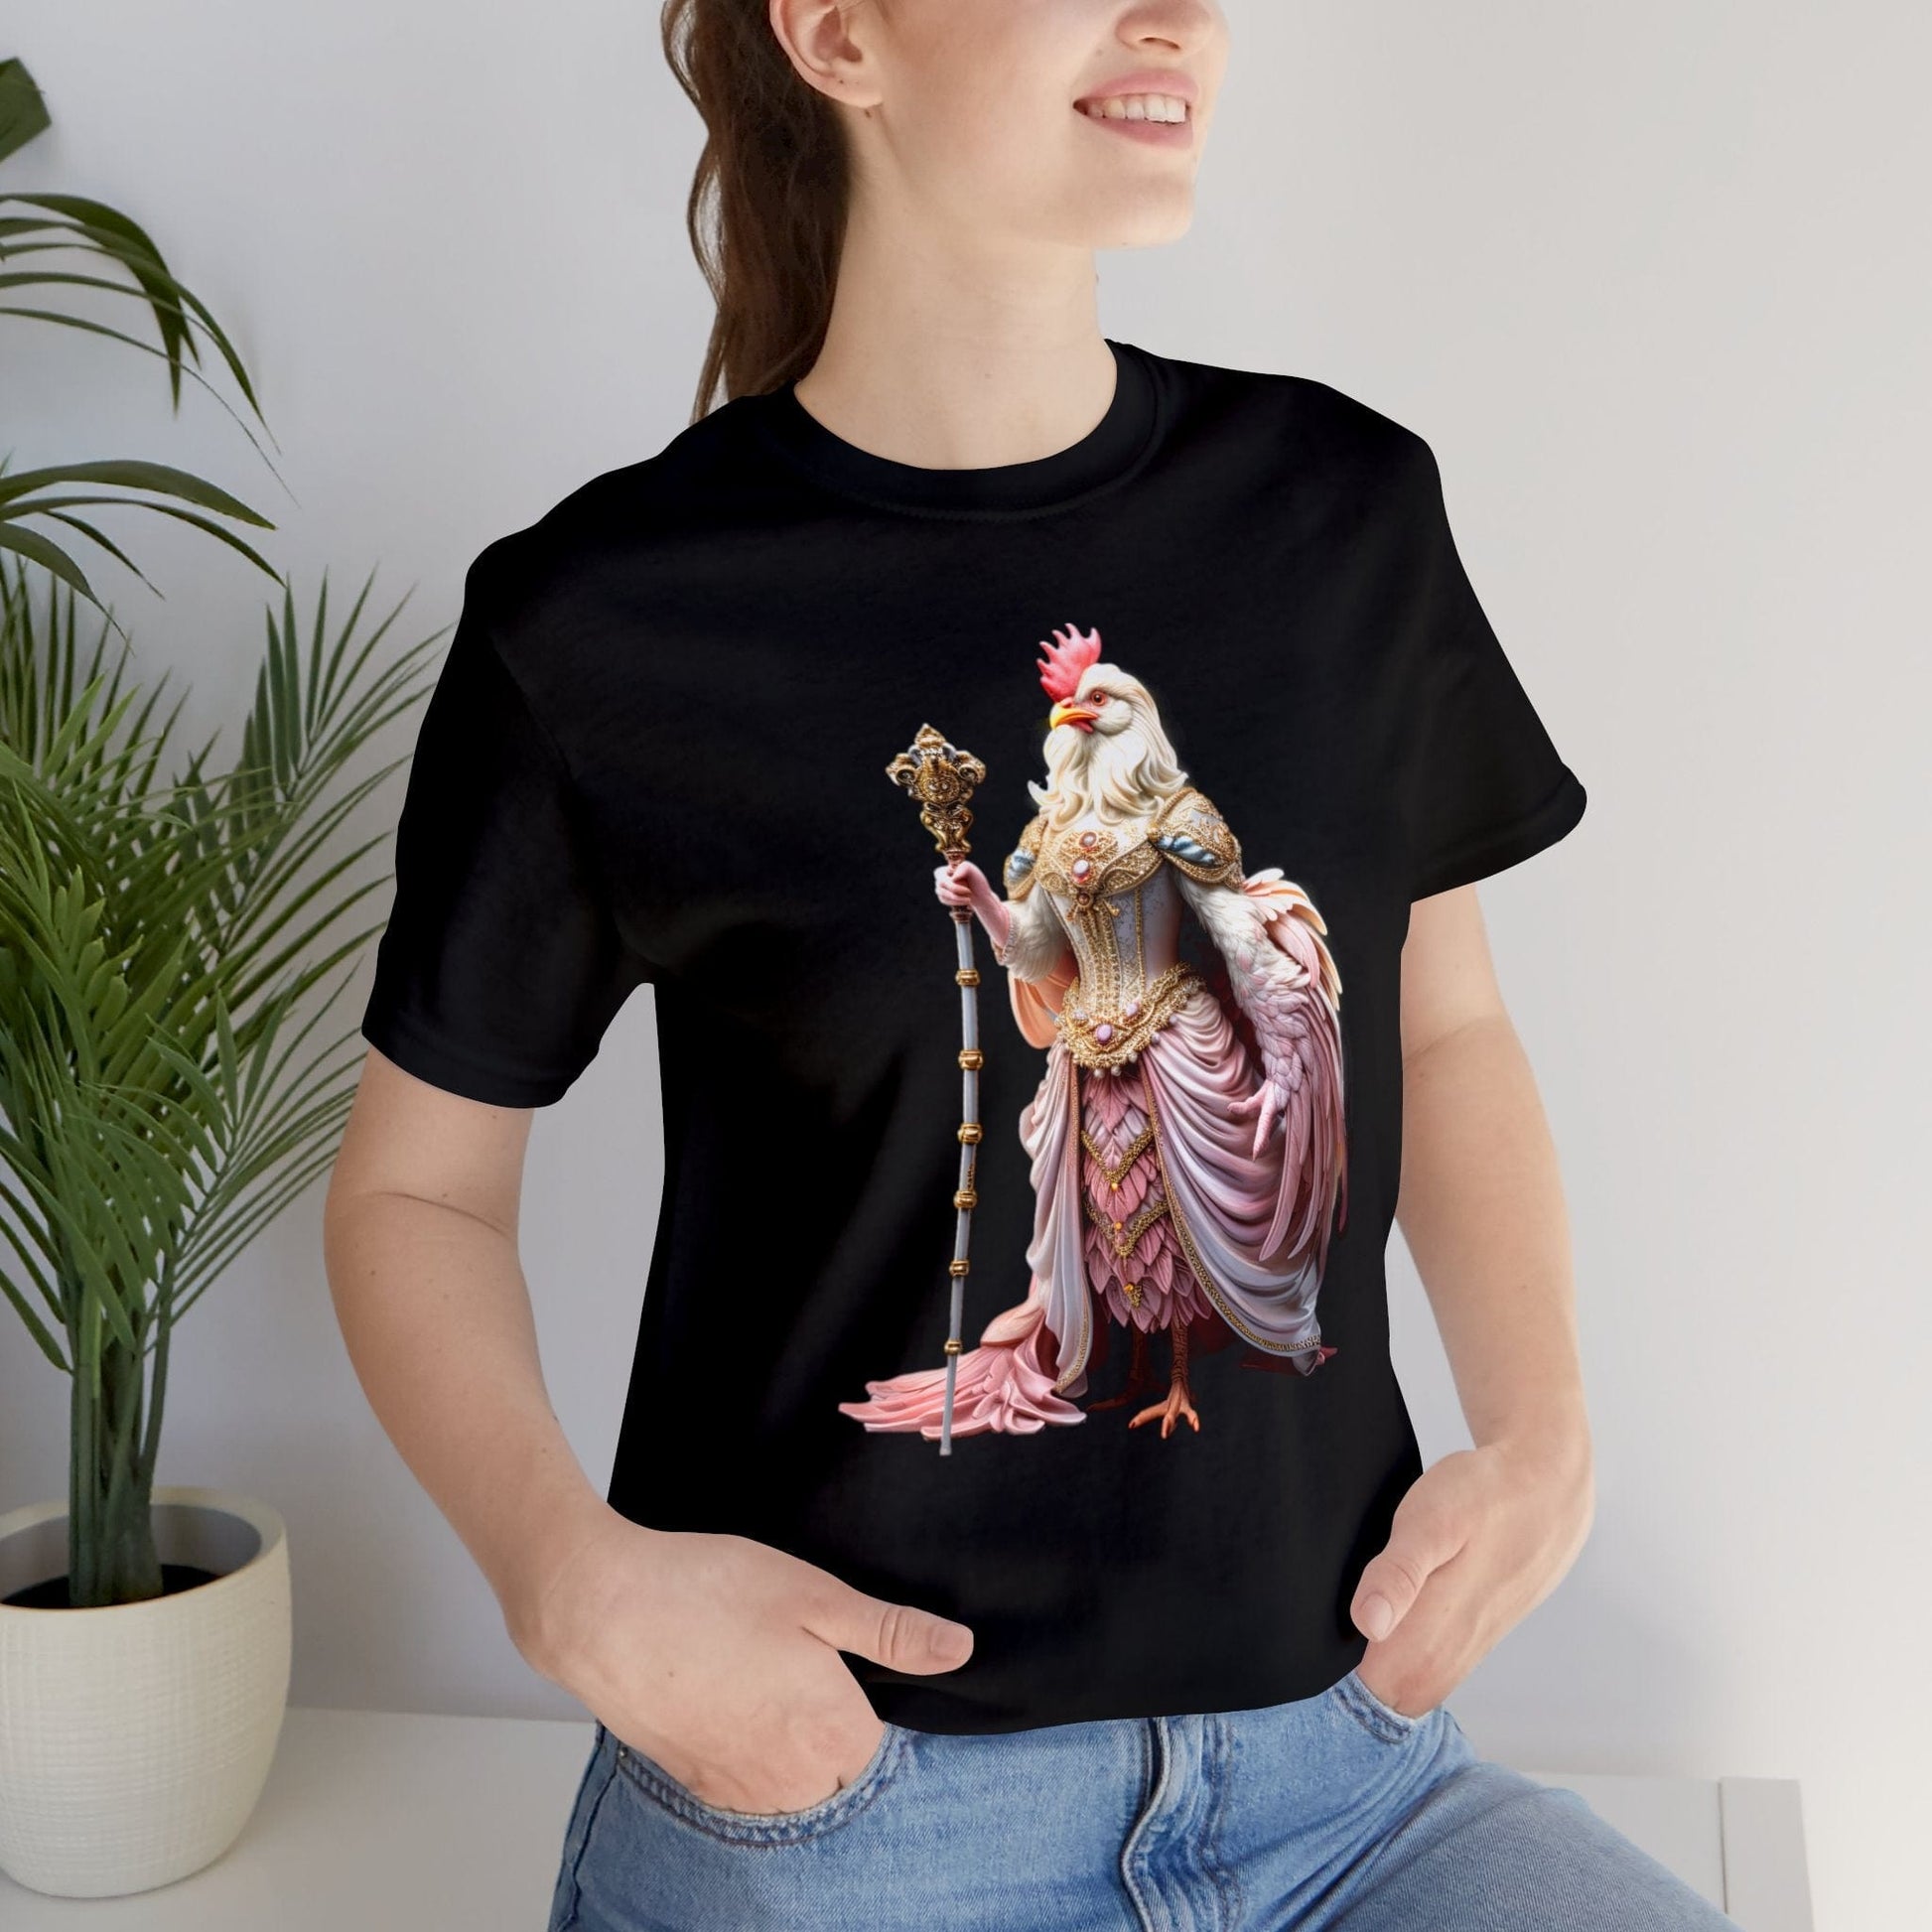 Royal Queen of the Chickens, Queen Cluck in a glorious pink gown on a Bella+Canvas 3001 t-shirt worn by a newly graduated college student